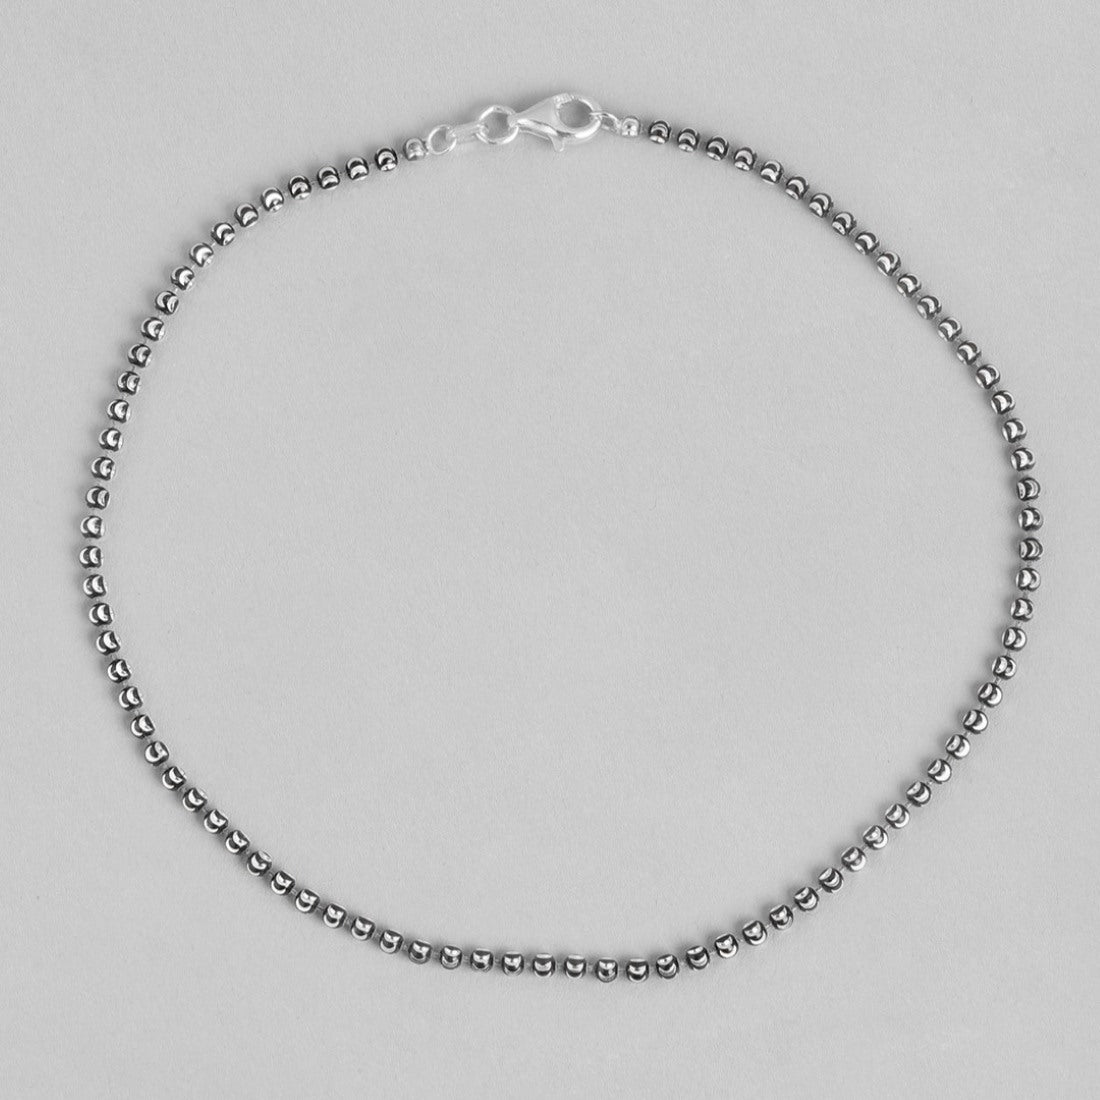 Sculpted Elegance Rhodium-Plated 925 Sterling Silver Beads Chain Anklet